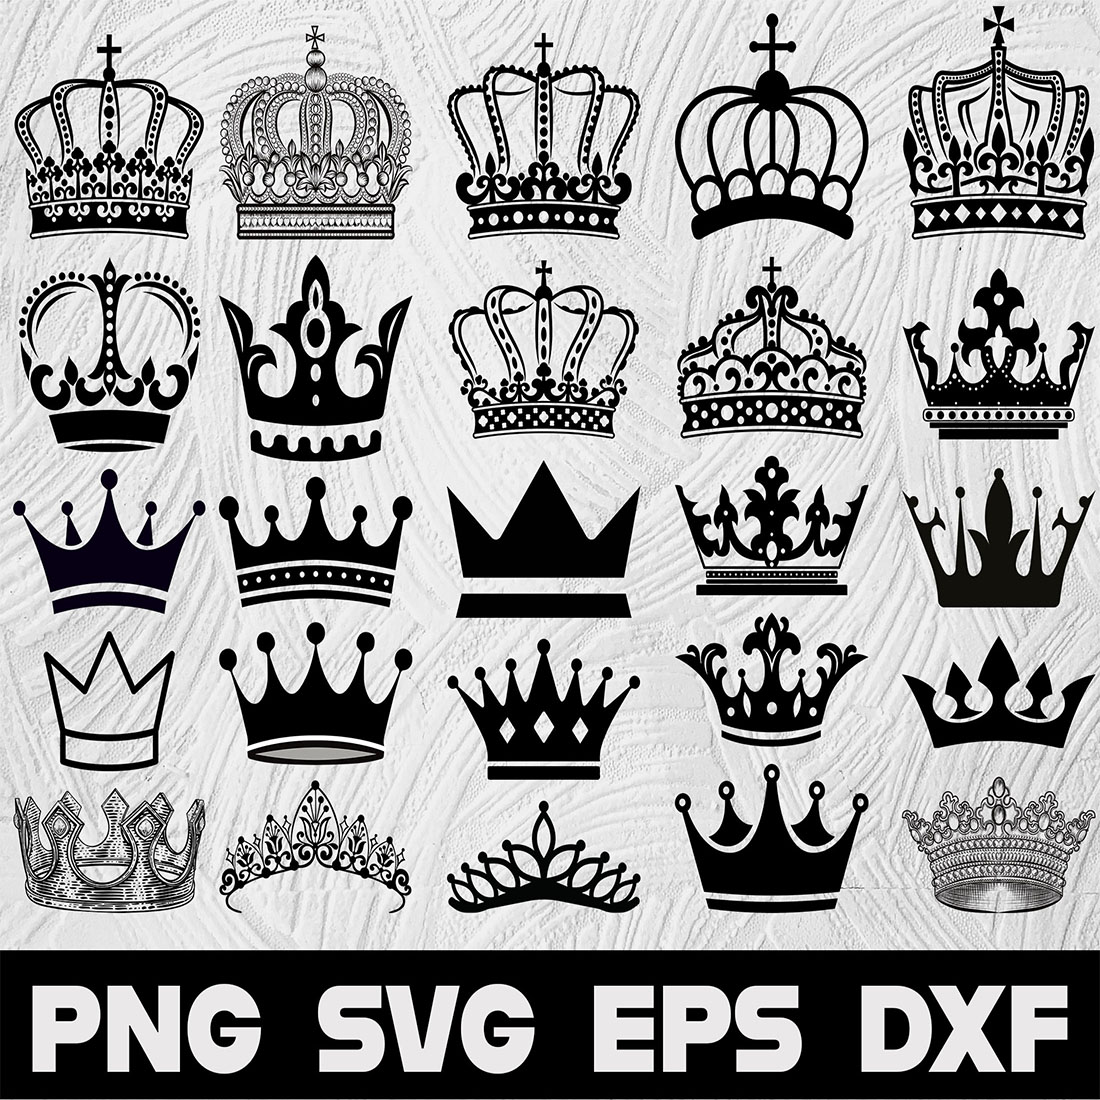 Royal Crown SVG, Princess Tiara SVG, King Crown, Queen Crown, Princess Crown, For Cricut, For Silhouette, Cut Files, Png, Dxf, Svg Files preview image.